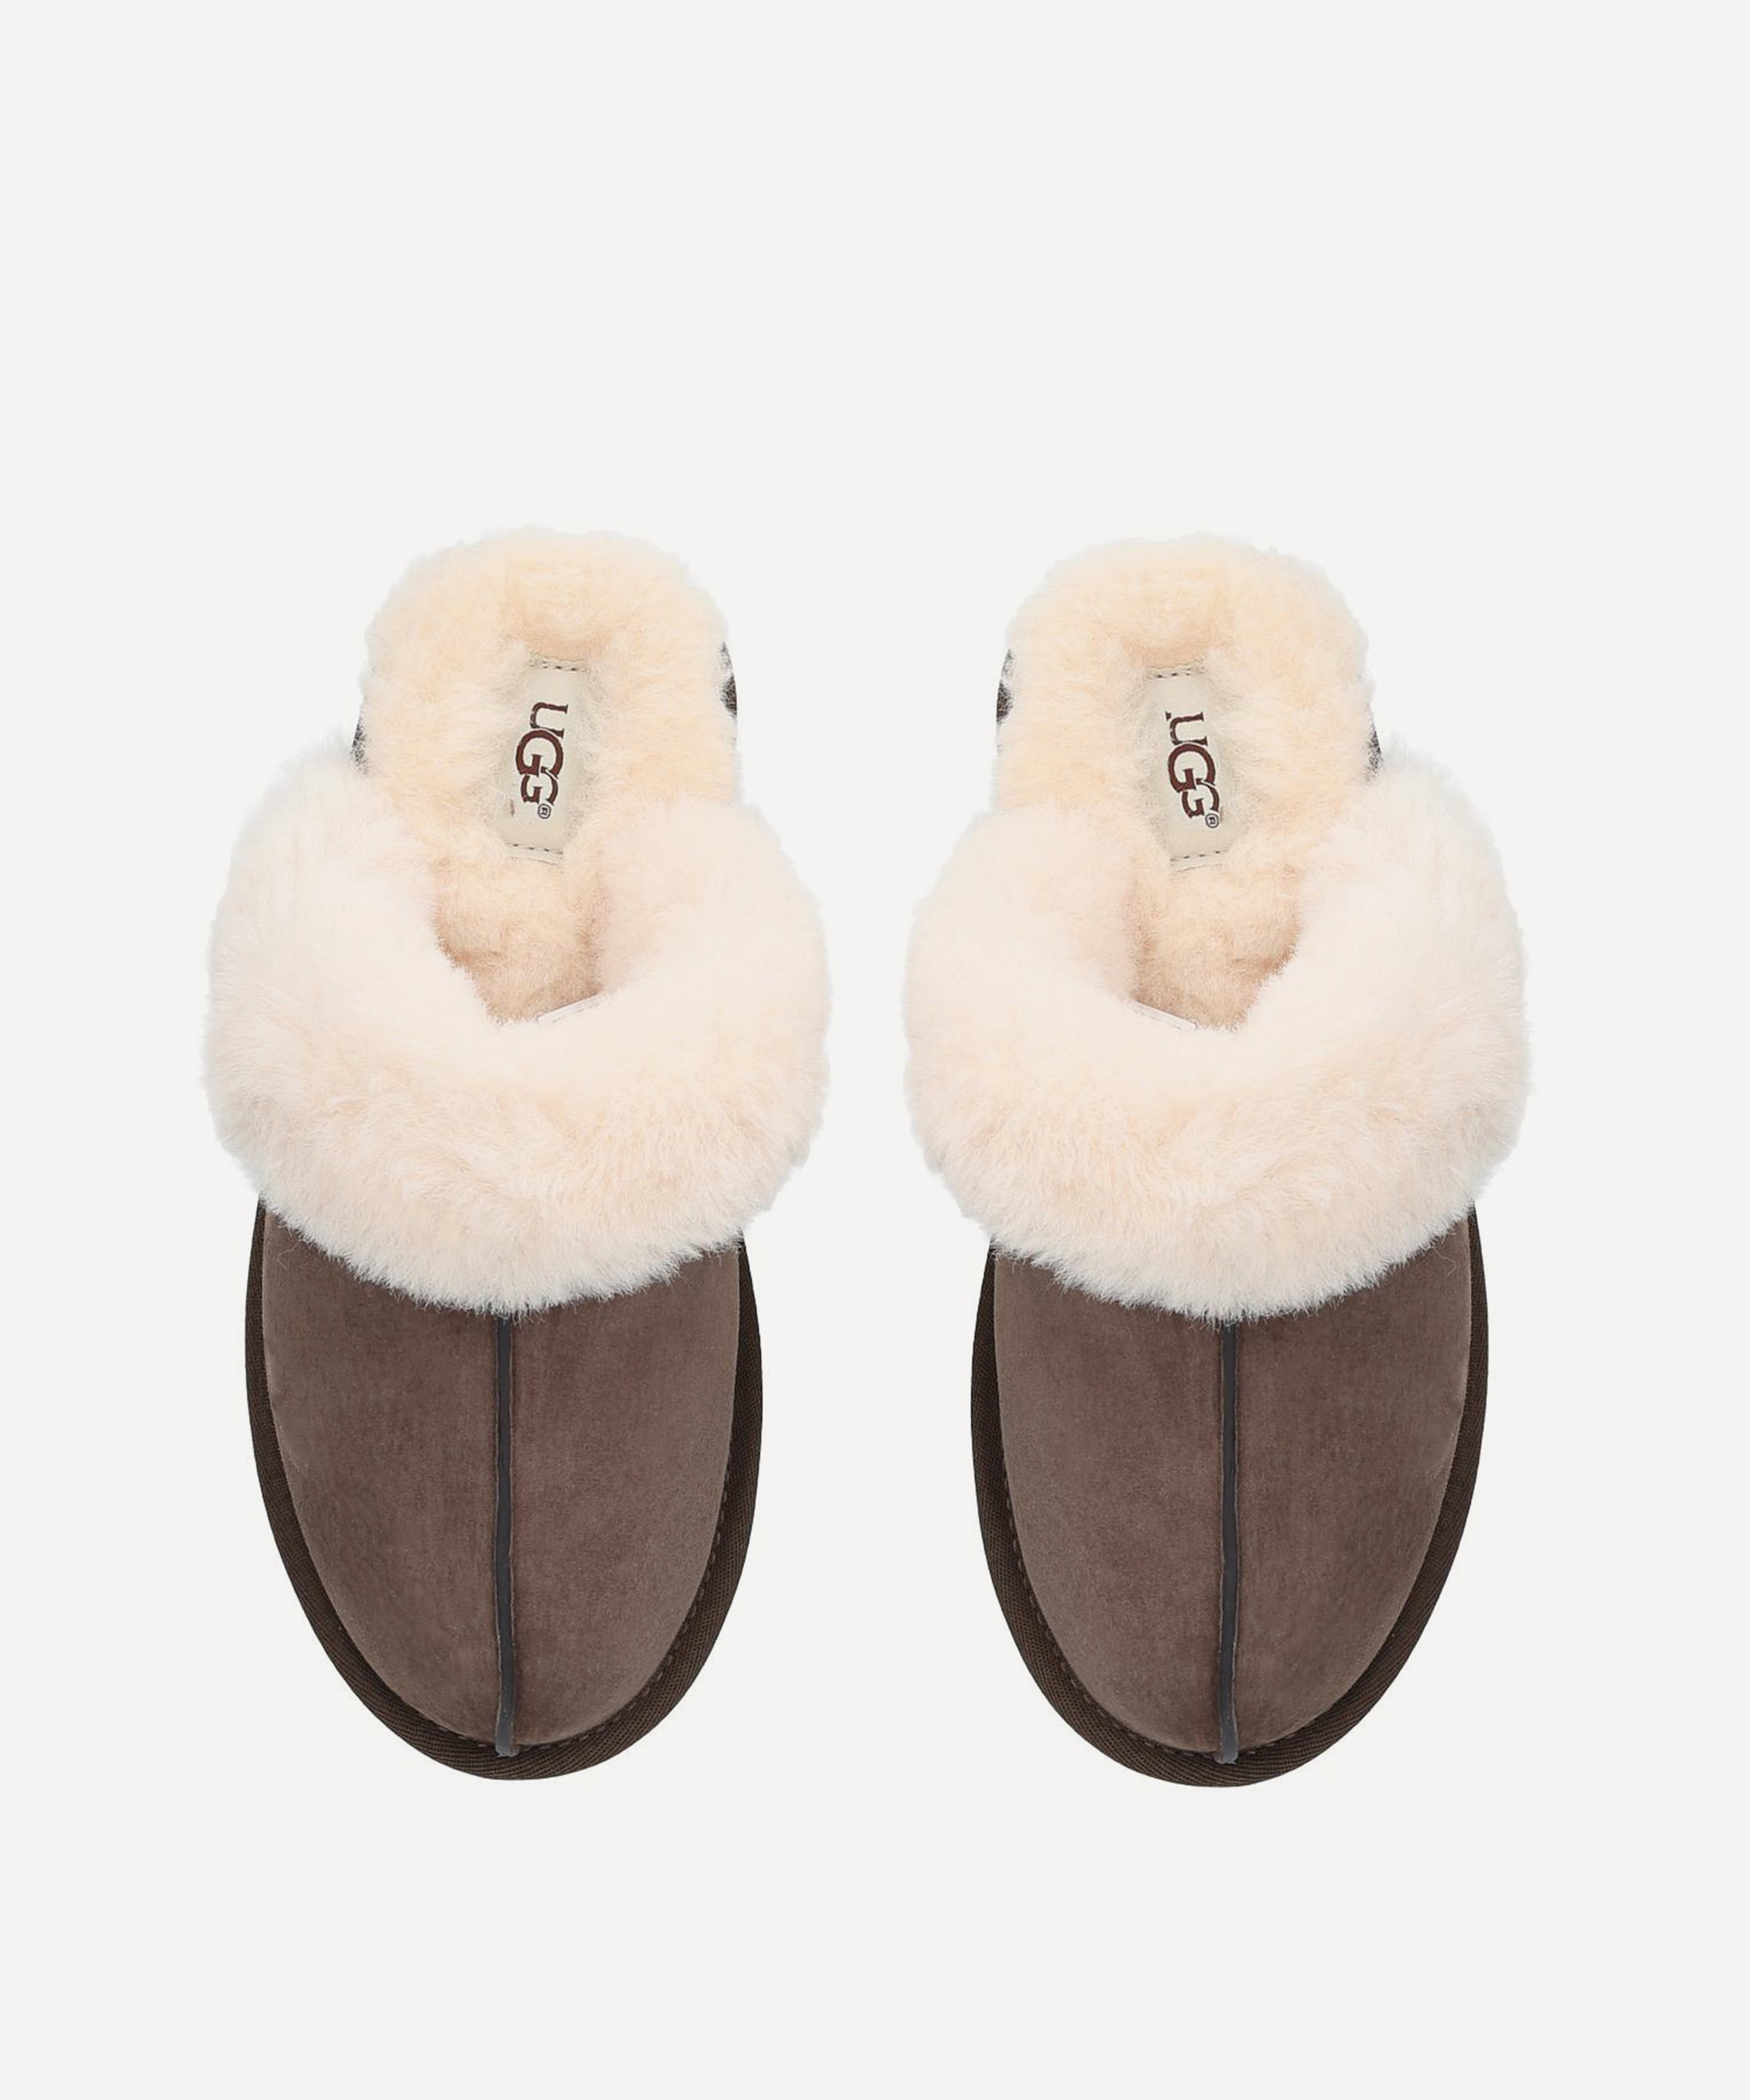 Ugg - Scuffette II Slippers image number 1